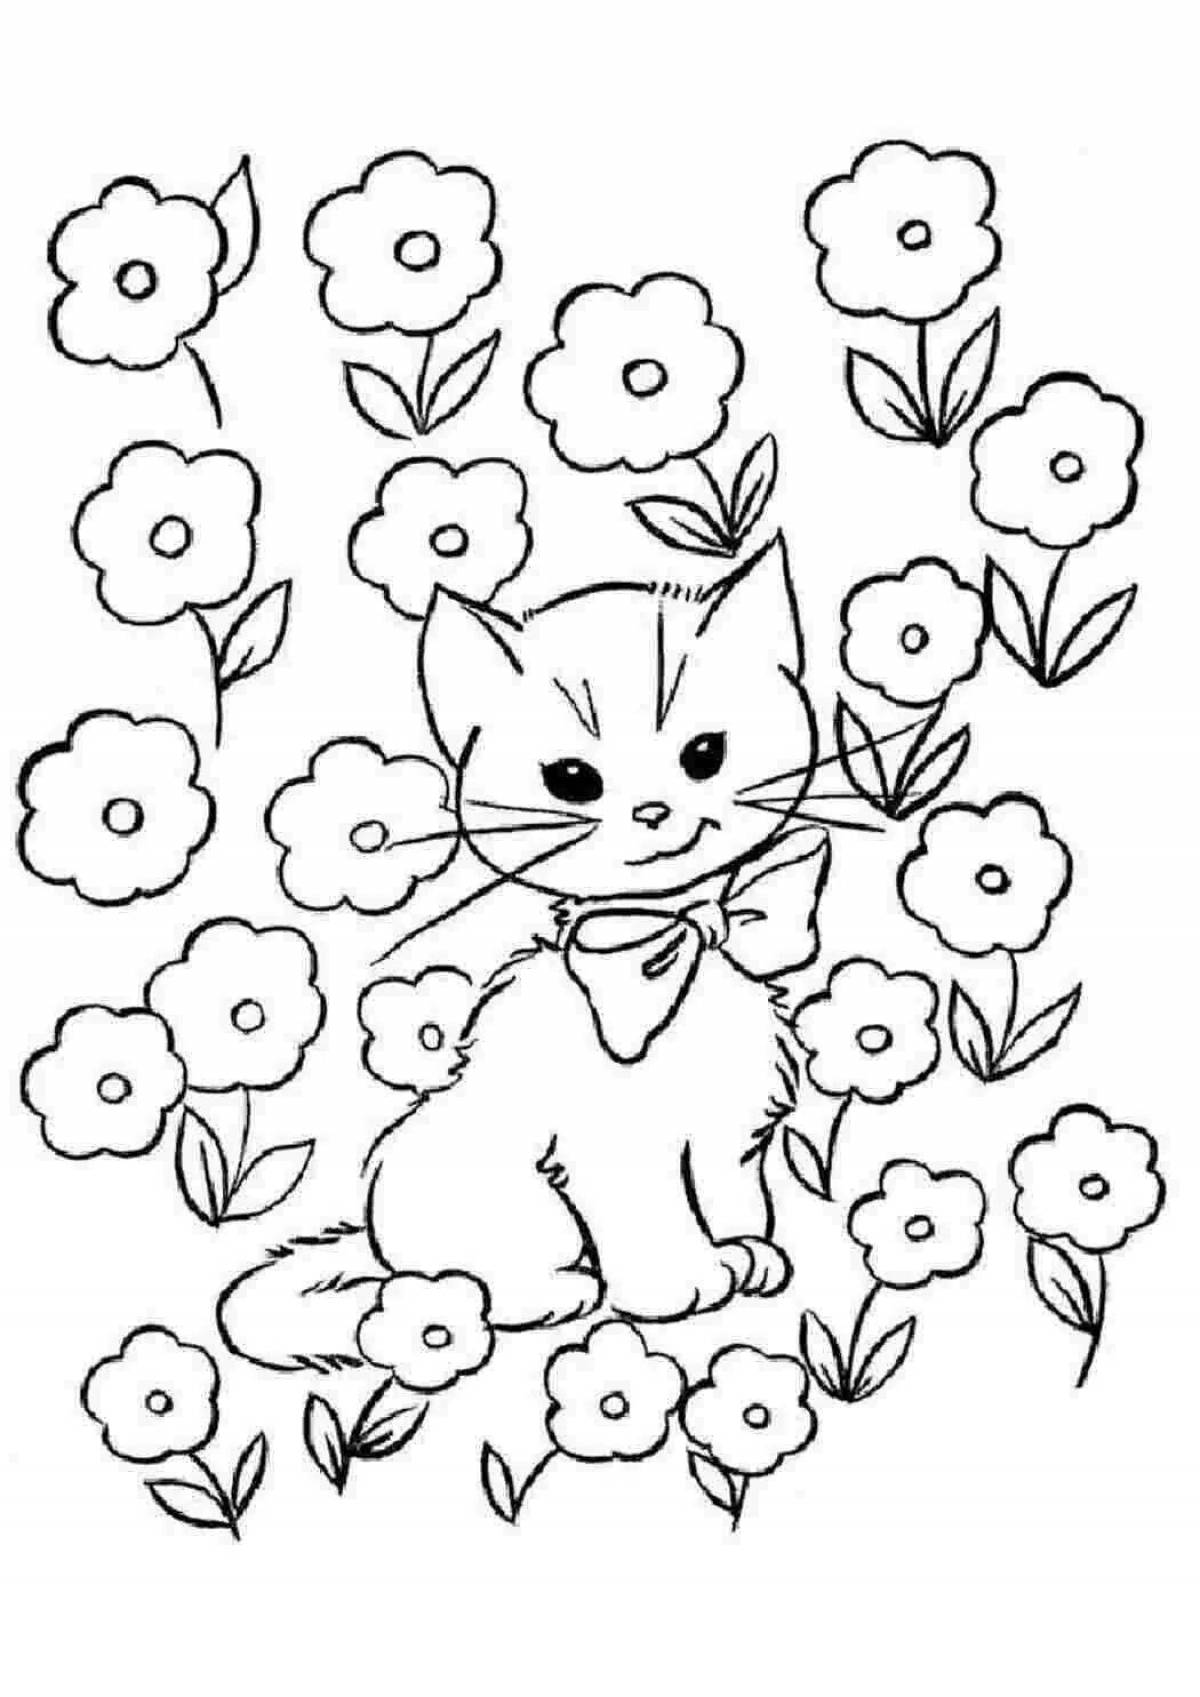 Coloring funny kittens